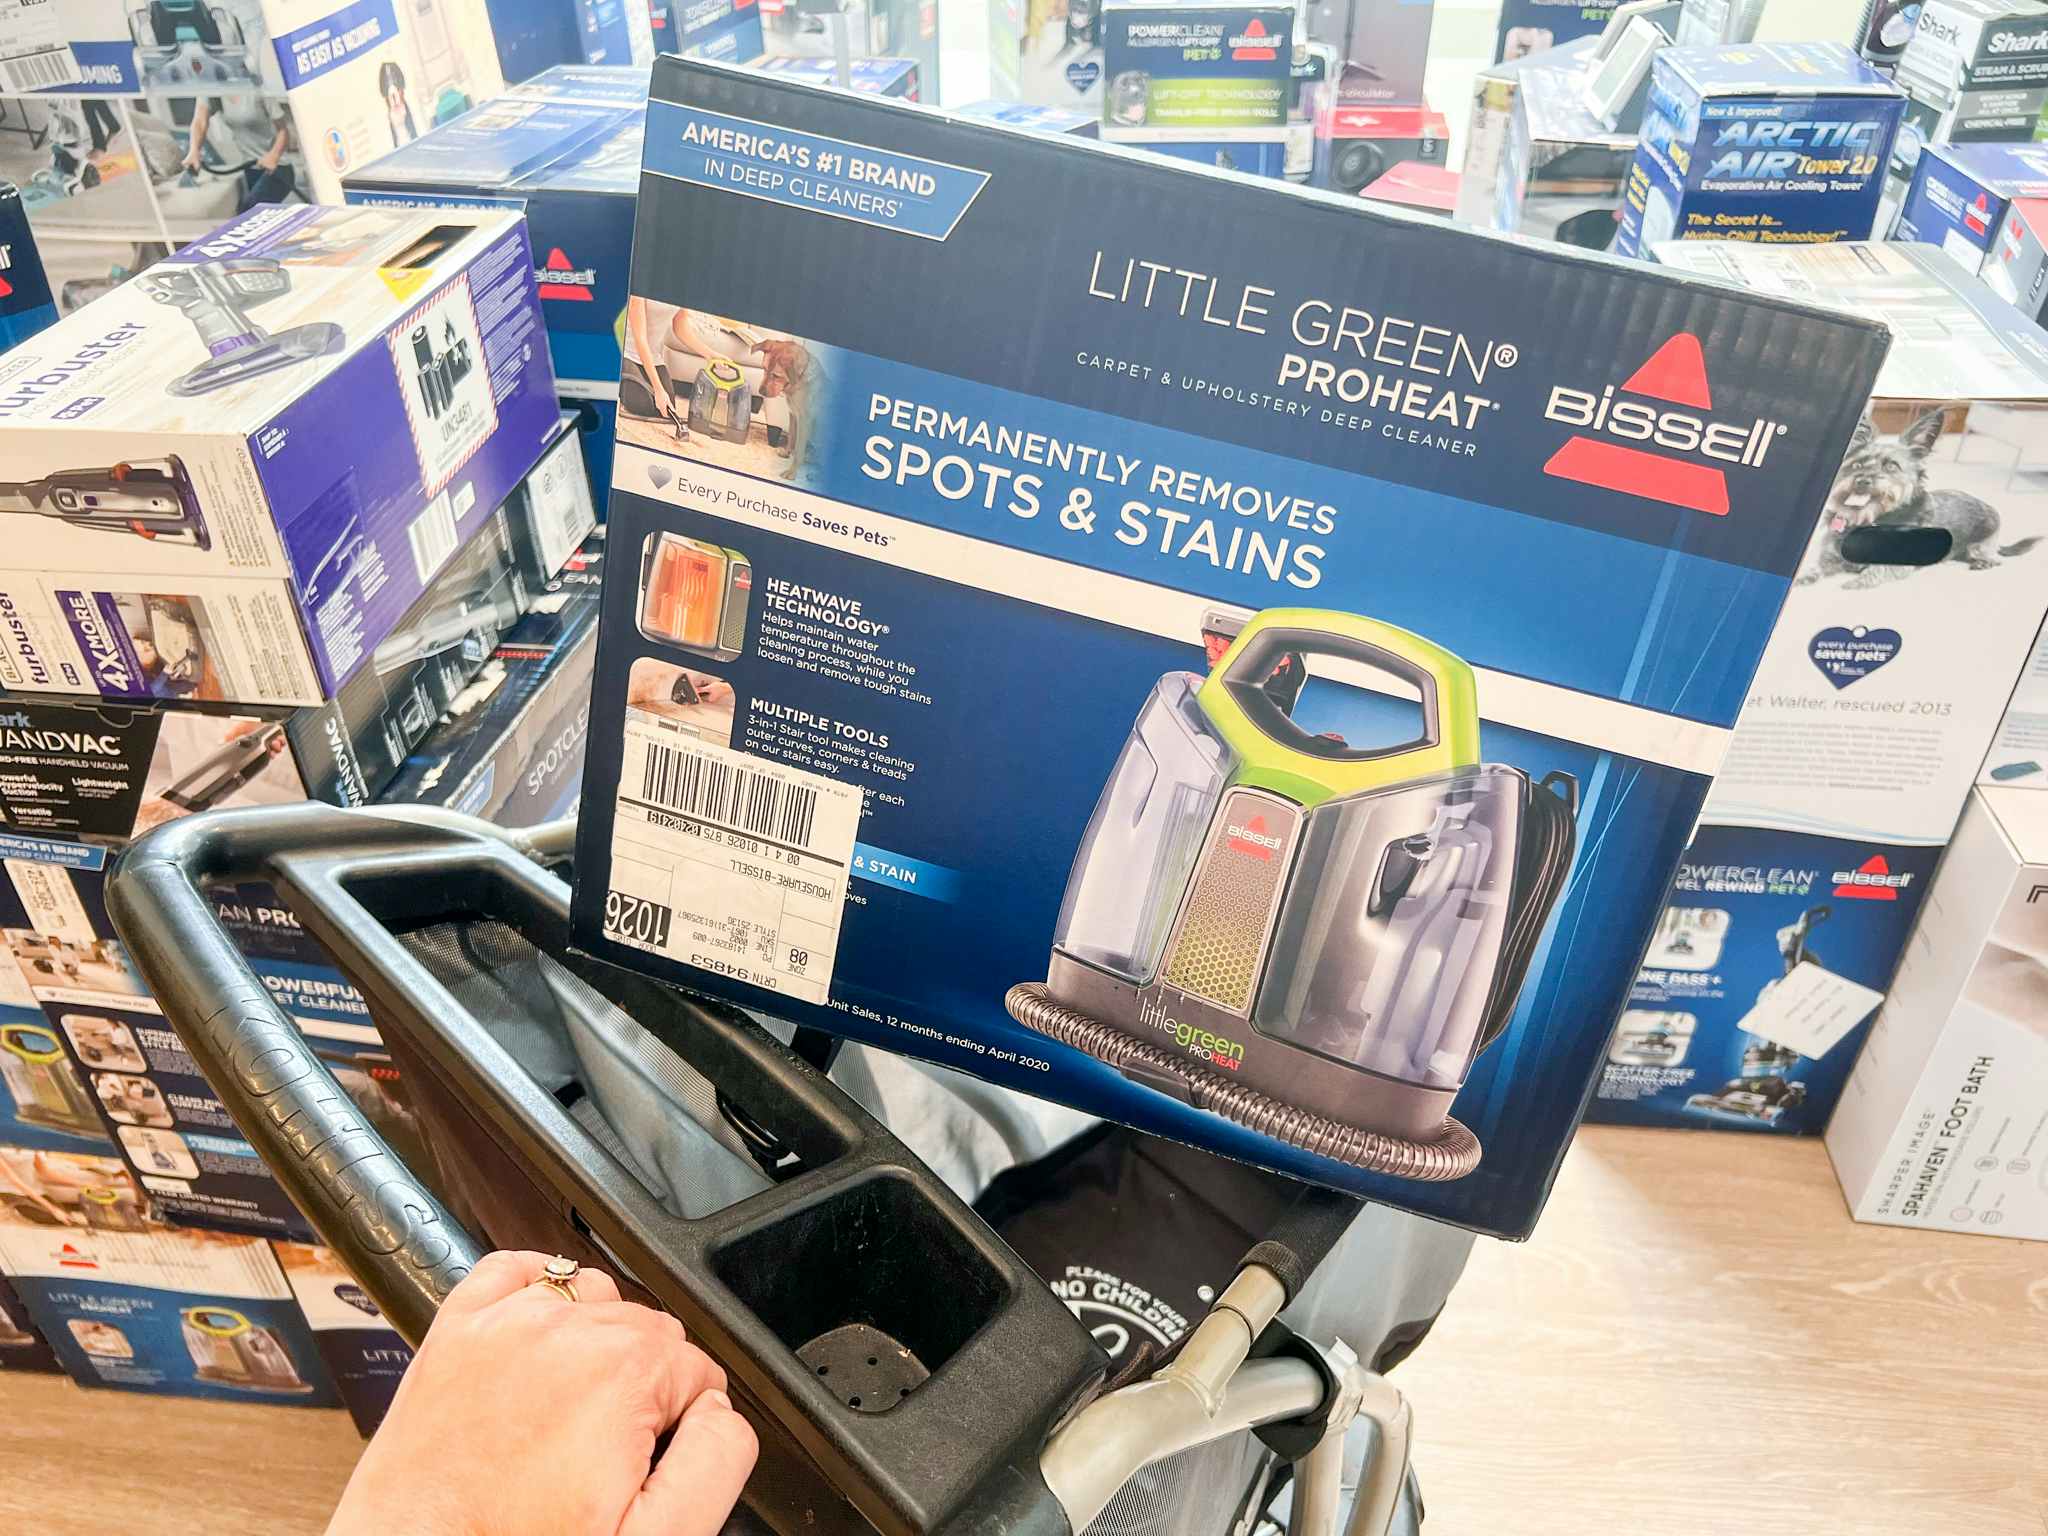 A Bissell Little Green Proheat in a Kohls shopping cart